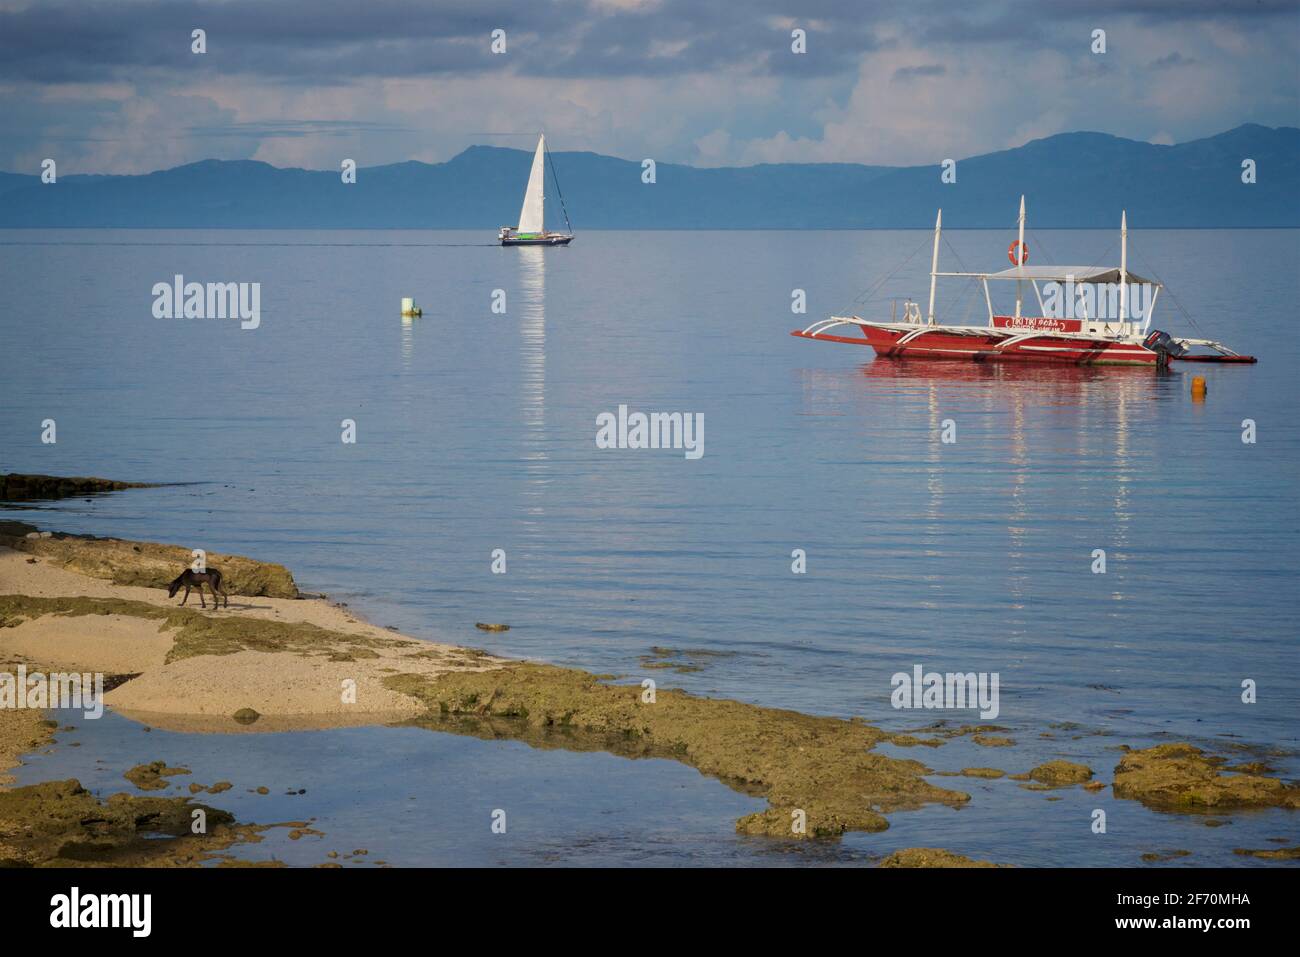 Low tide at Moalboal, Cebu island, Philippines. with boats on the Visayan  Sea and Negros island beyond, Dog on the beach in the foreground. Central  Visayas region Stock Photo - Alamy